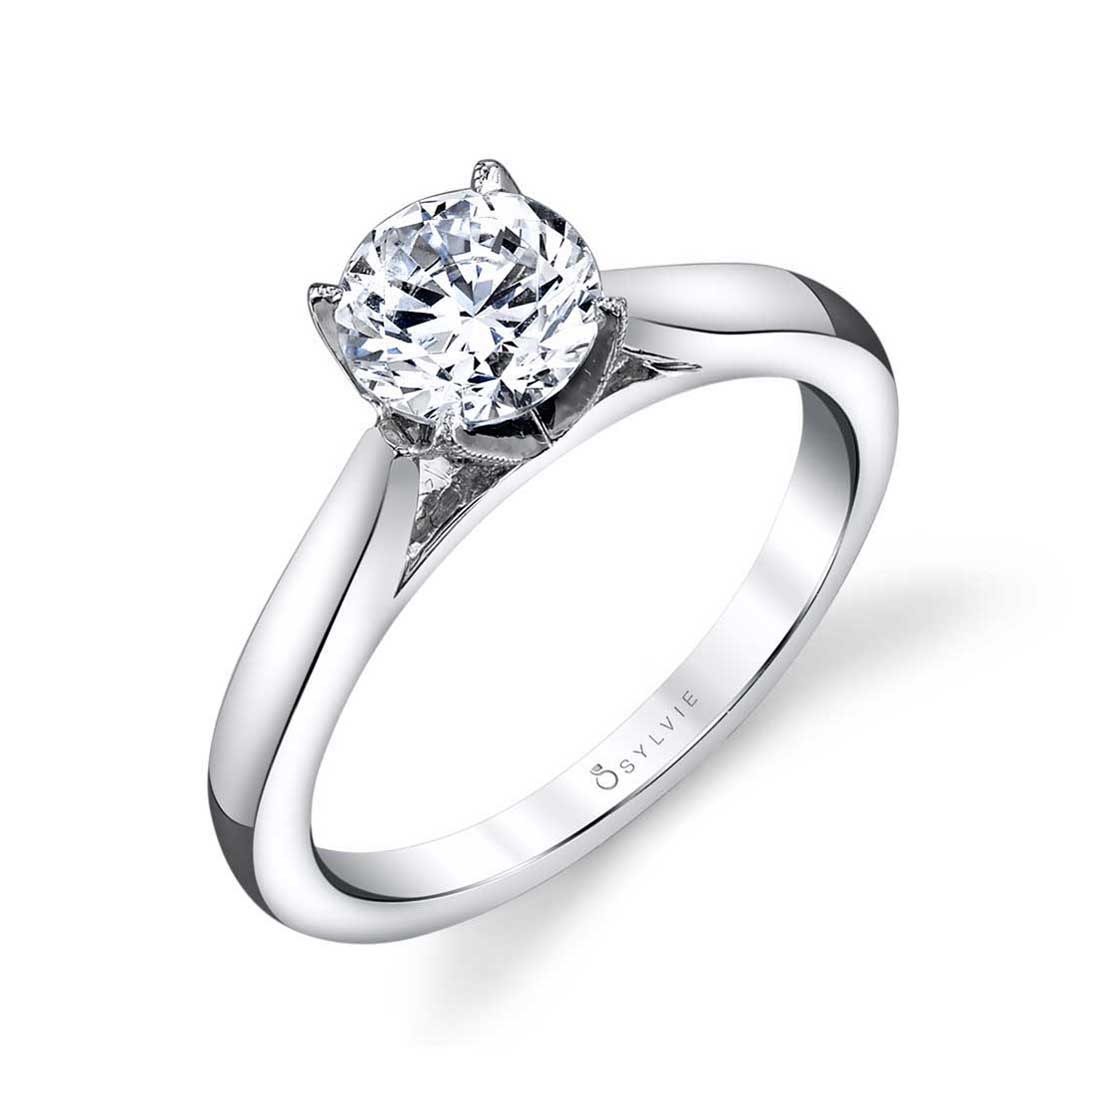 Modern Solitaire Engagement Ring - Aubree Stuart Benjamin & Co. Jewelry Designs San Diego, CA